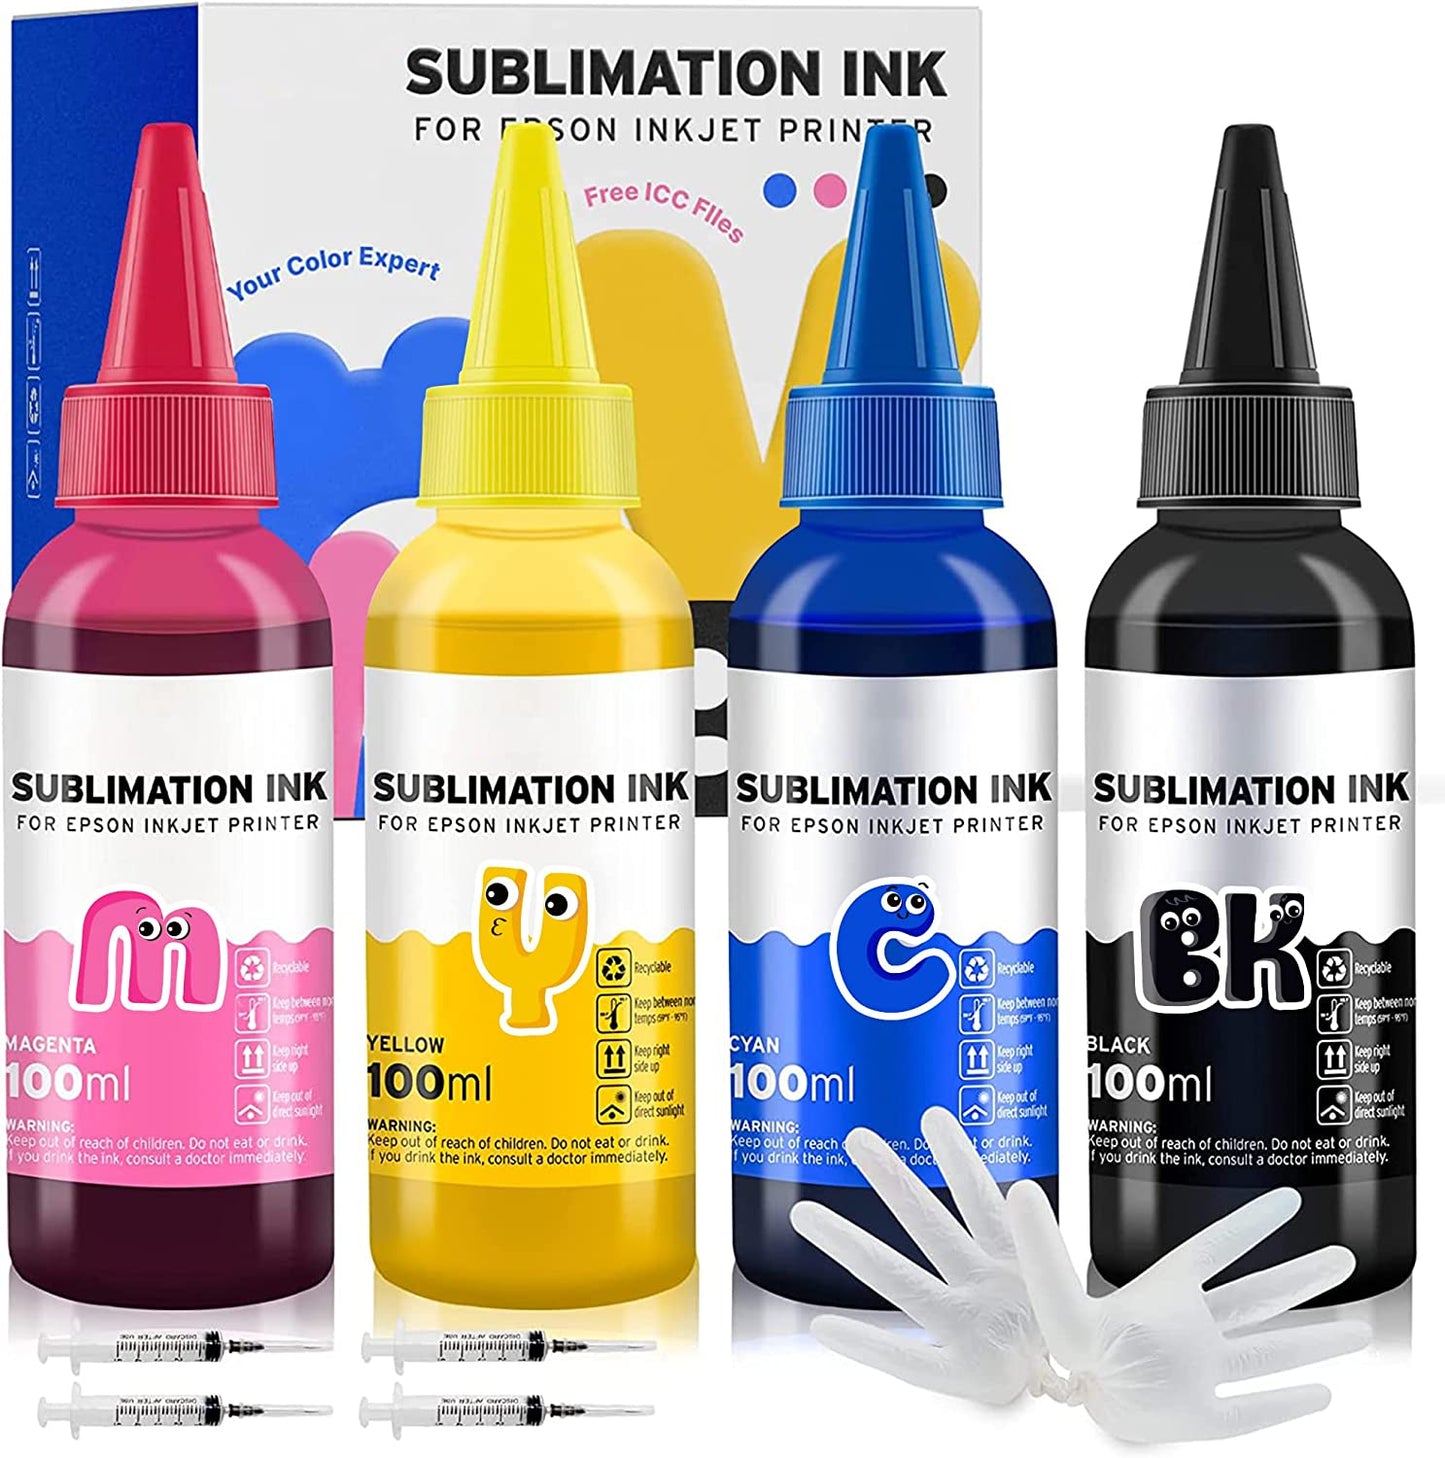 Multi-Color Printers Jack 4 Pack 400ML Sublimation Ink Replacement